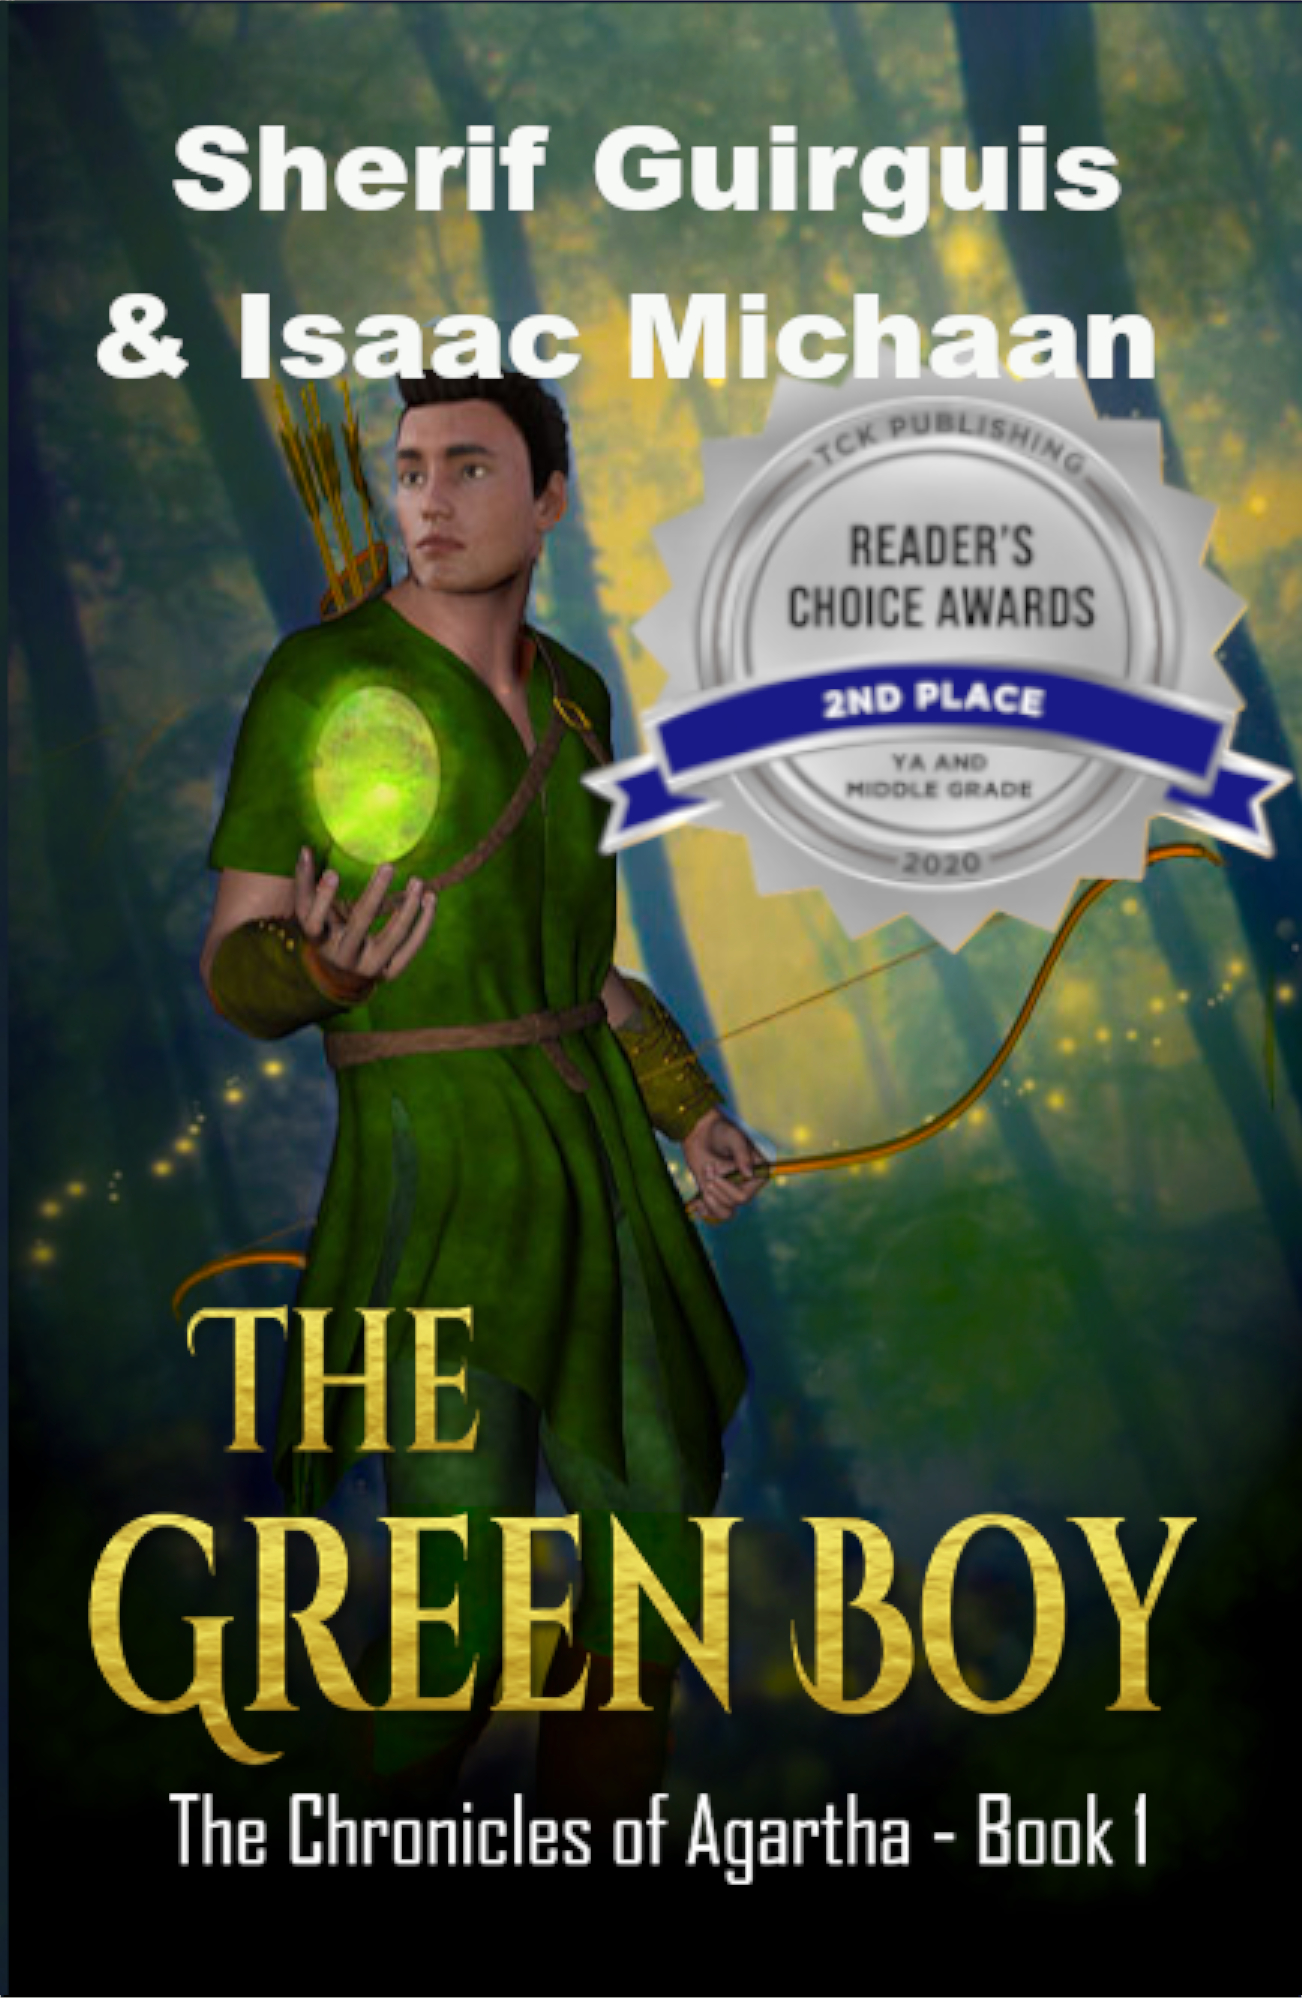 FREE: The Green Boy by Sherif Guirguis